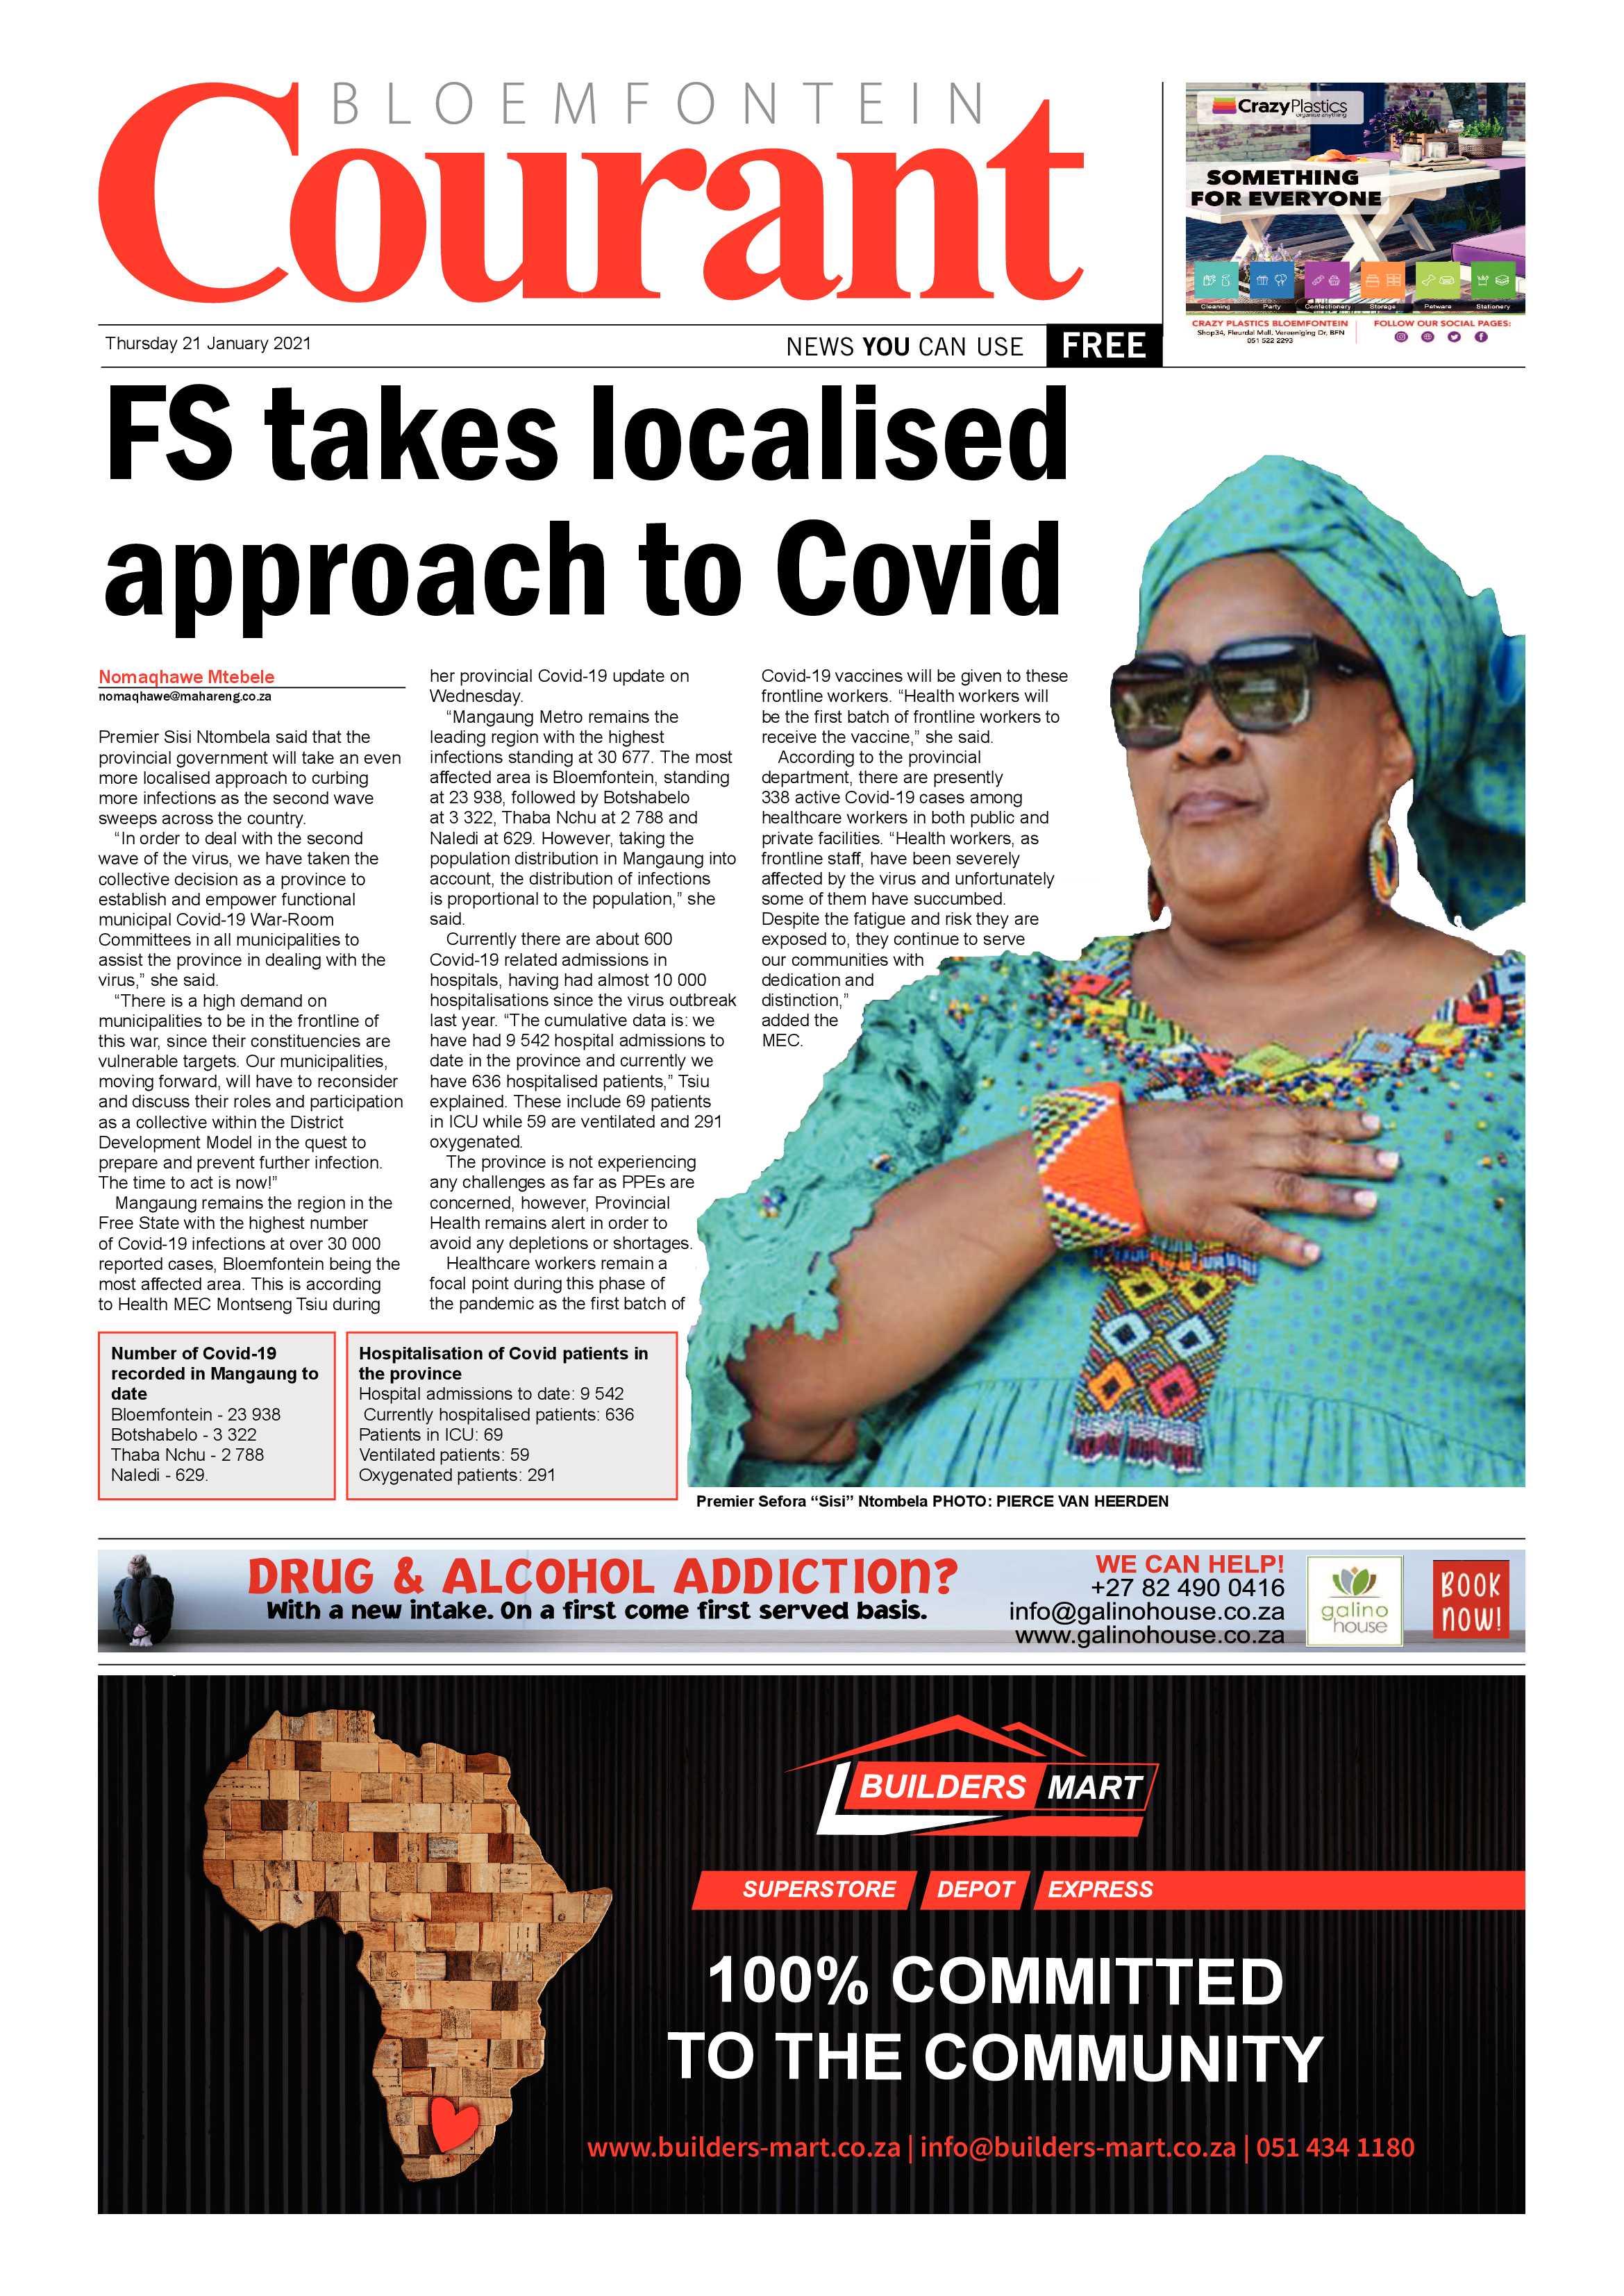 https-bloemfonteincourant-epaper-products-caxton-co-za-wp-content-ftp-epaper_uploads-86-bloemfontein_courant_21_january_2021-bloemfontein_courant_21_january_2021-5-pdfpg12-epapers-page-1